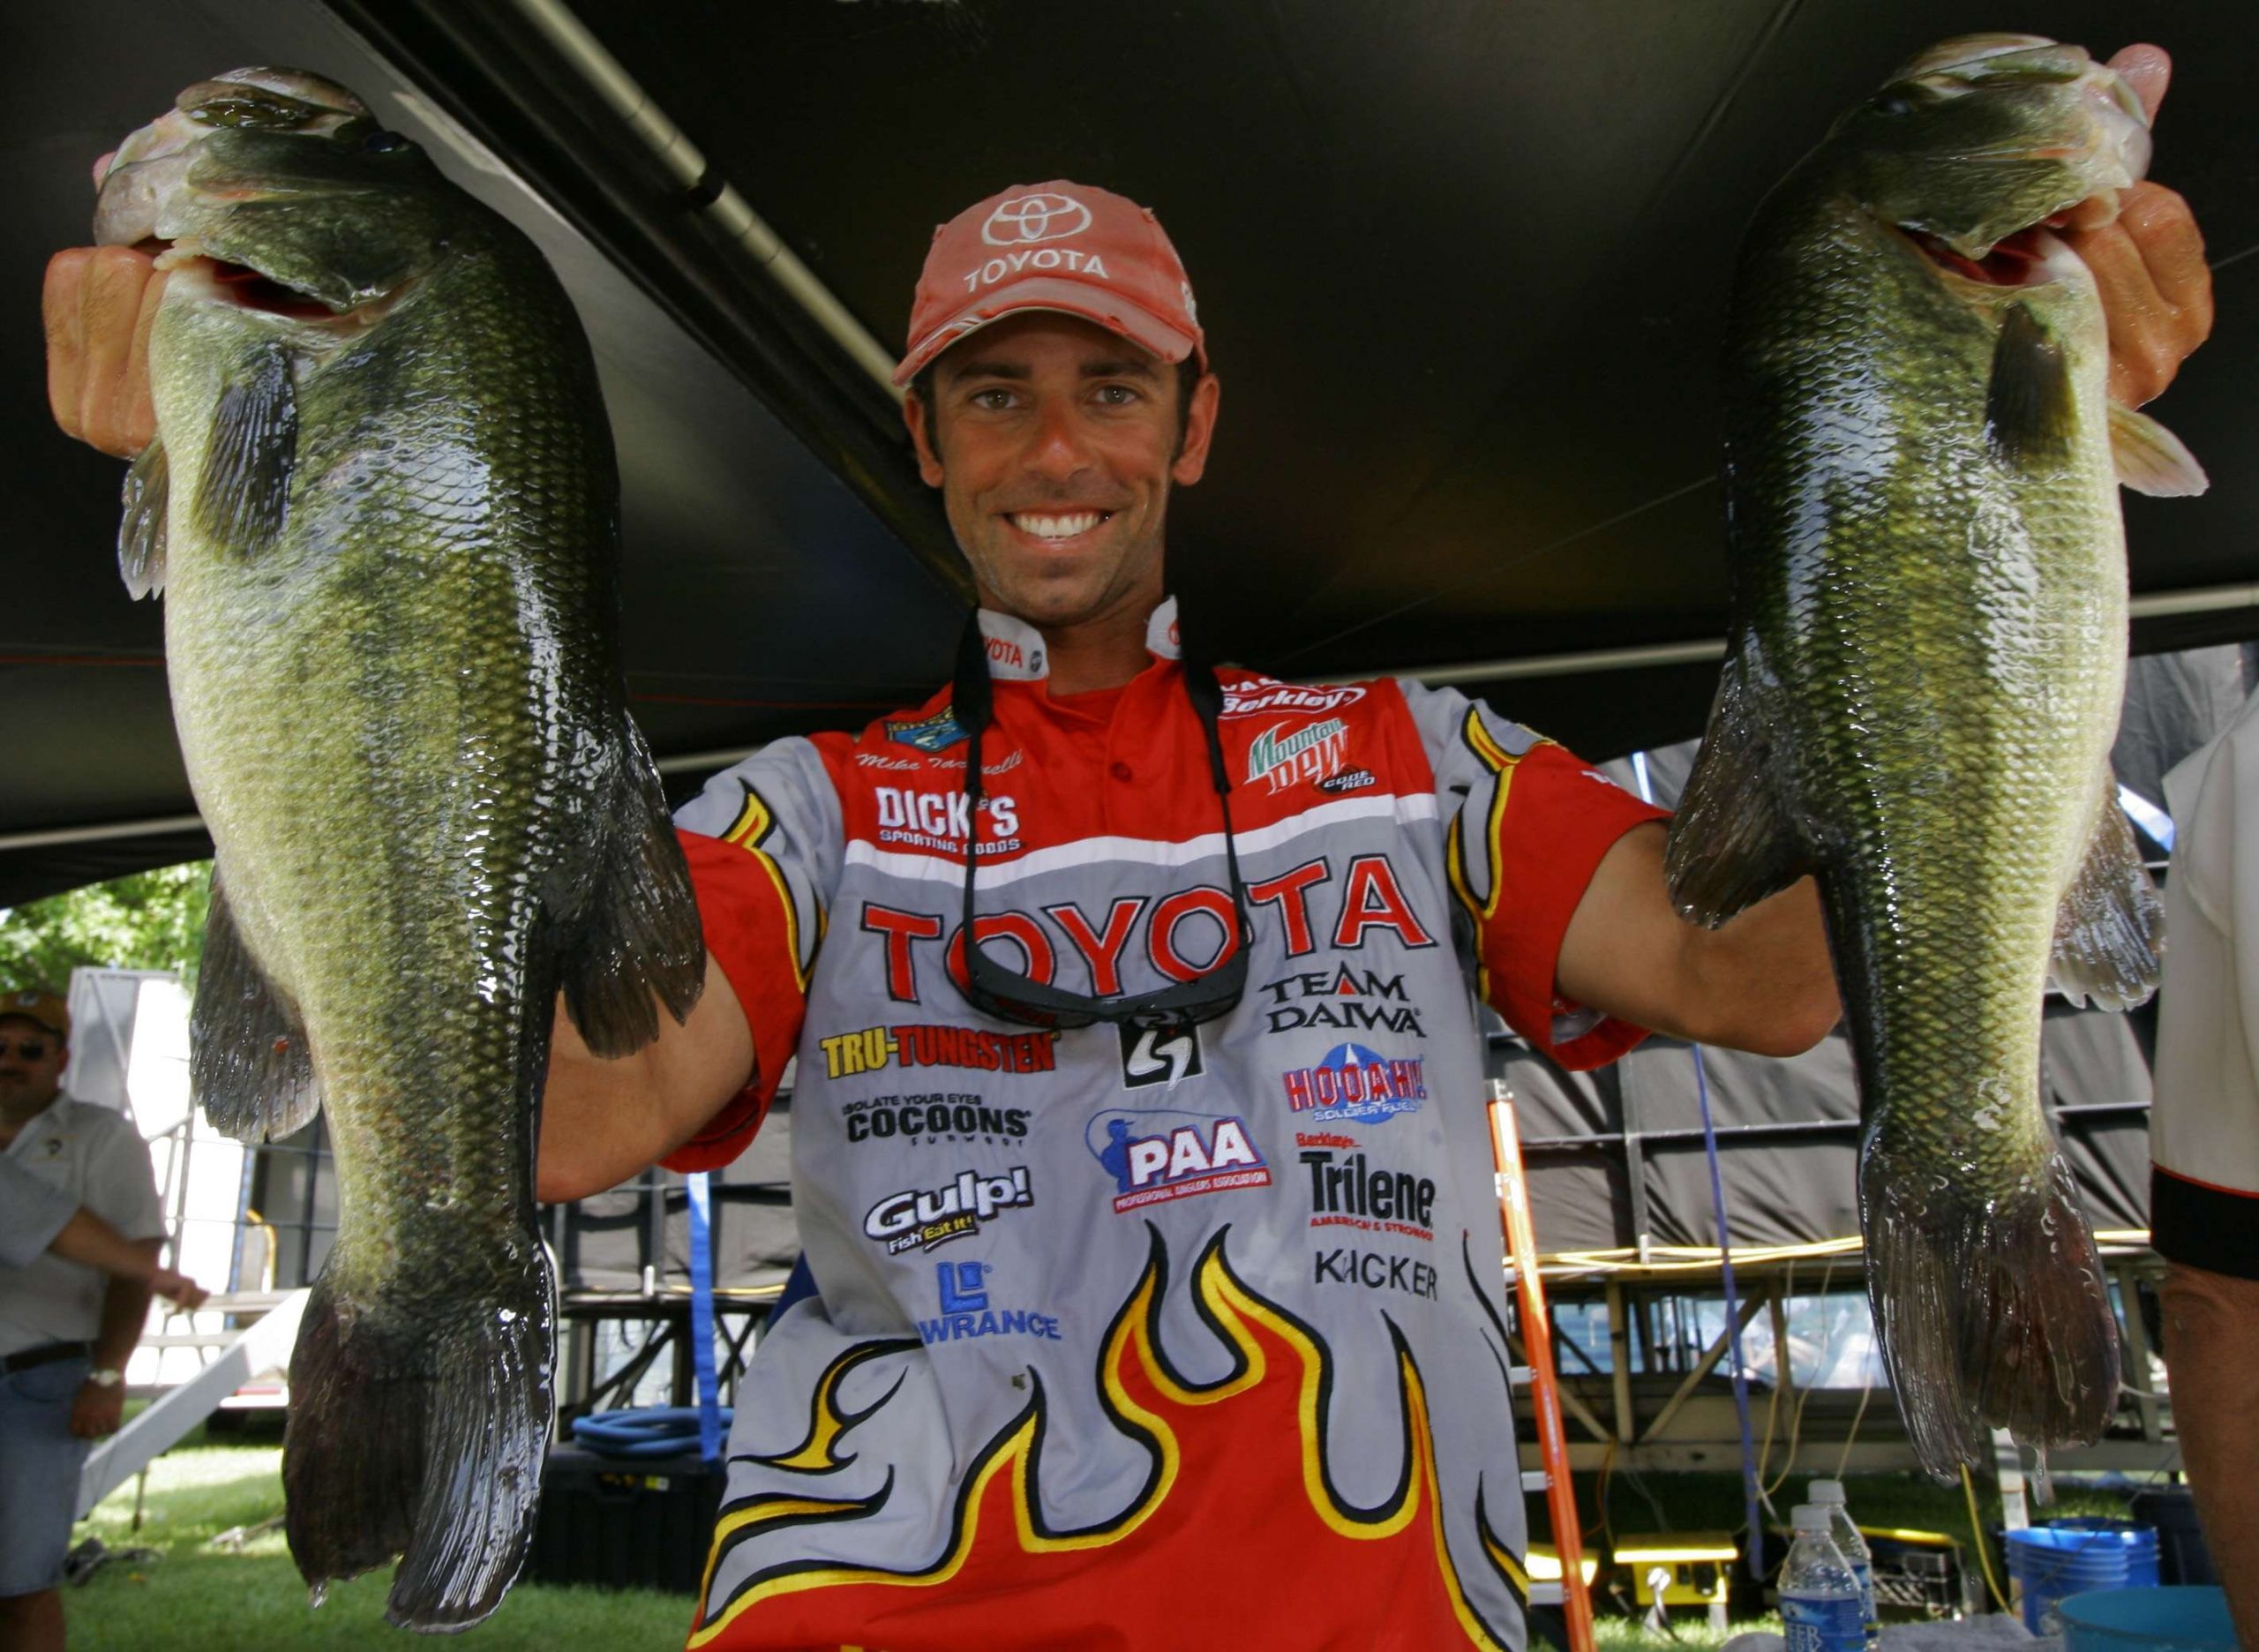 <b>2006</b><br>In the inaugural year of the Elite Series, Michael Iaconelli prevailed as the 2006 AOY champion.